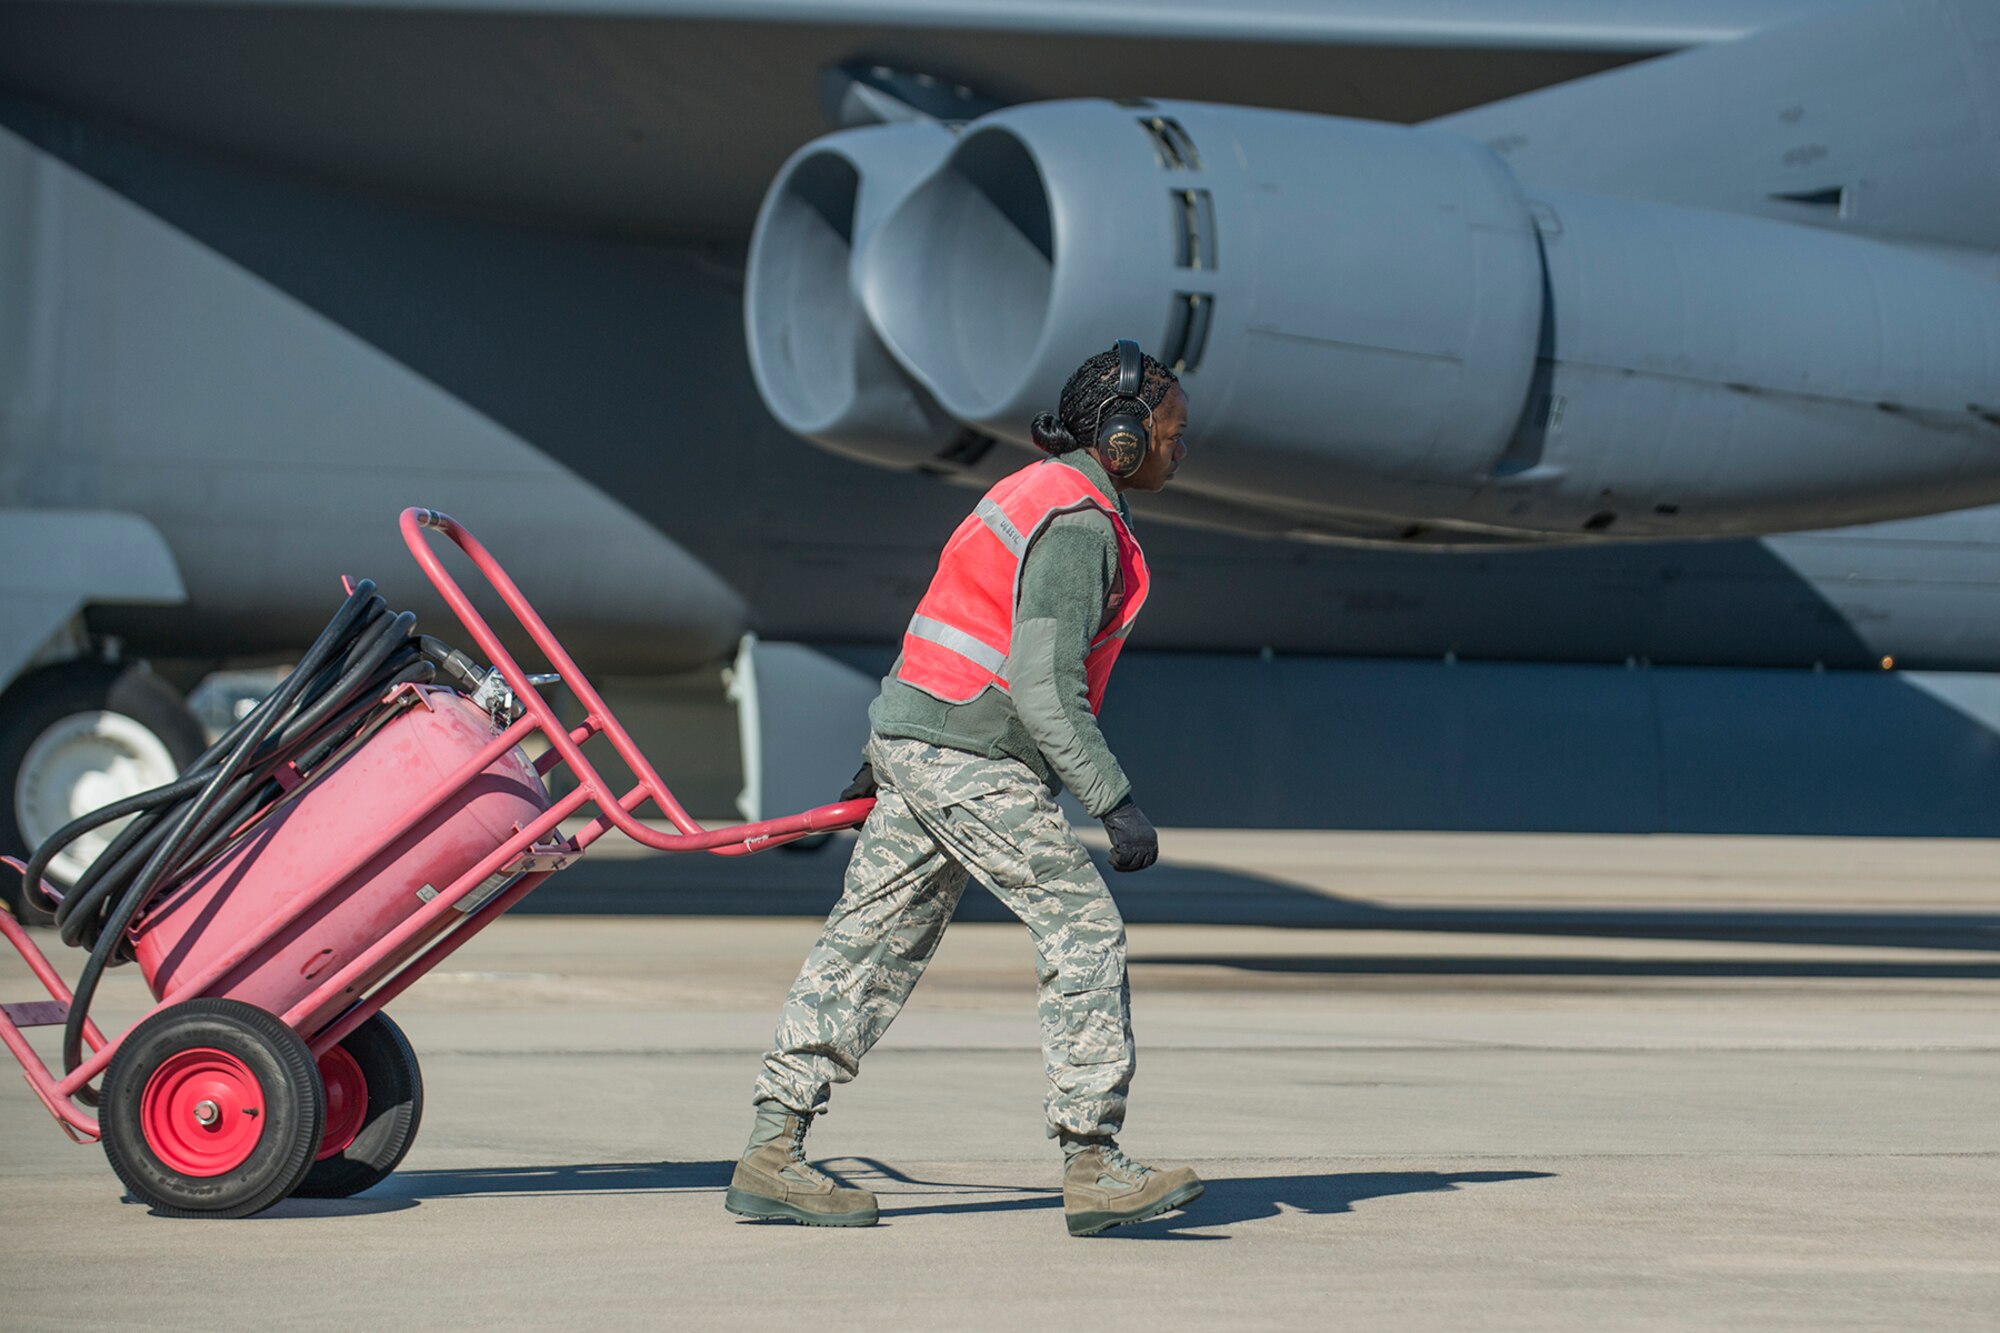 U.S. Air Force Tech. Sgt. Holly Guerra, assigned to the 307th Aircraft Maintenance Squadron, moves a fire extinguisher out of the way of a B-52H Stratofortress prior to its taxi on Mar. 22, 2013, Barksdale Air Force Base, La. In recognition of Women’s History Month, the Air Force Reserve Command’s 307th Bomb Wing and Barksdale’s 2nd Bomb Wing launched two B-52H Stratofortress bombers flown by two all-female aircrews made up from members of the Air Force Reserve Command’s 93rd and 343rd Bomb Squadrons and the 2nd Bomb Wing’s 11th, 20th and 96th Bomb Squadrons. (U.S. Air Force photo by Master Sgt. Greg Steele/Released)